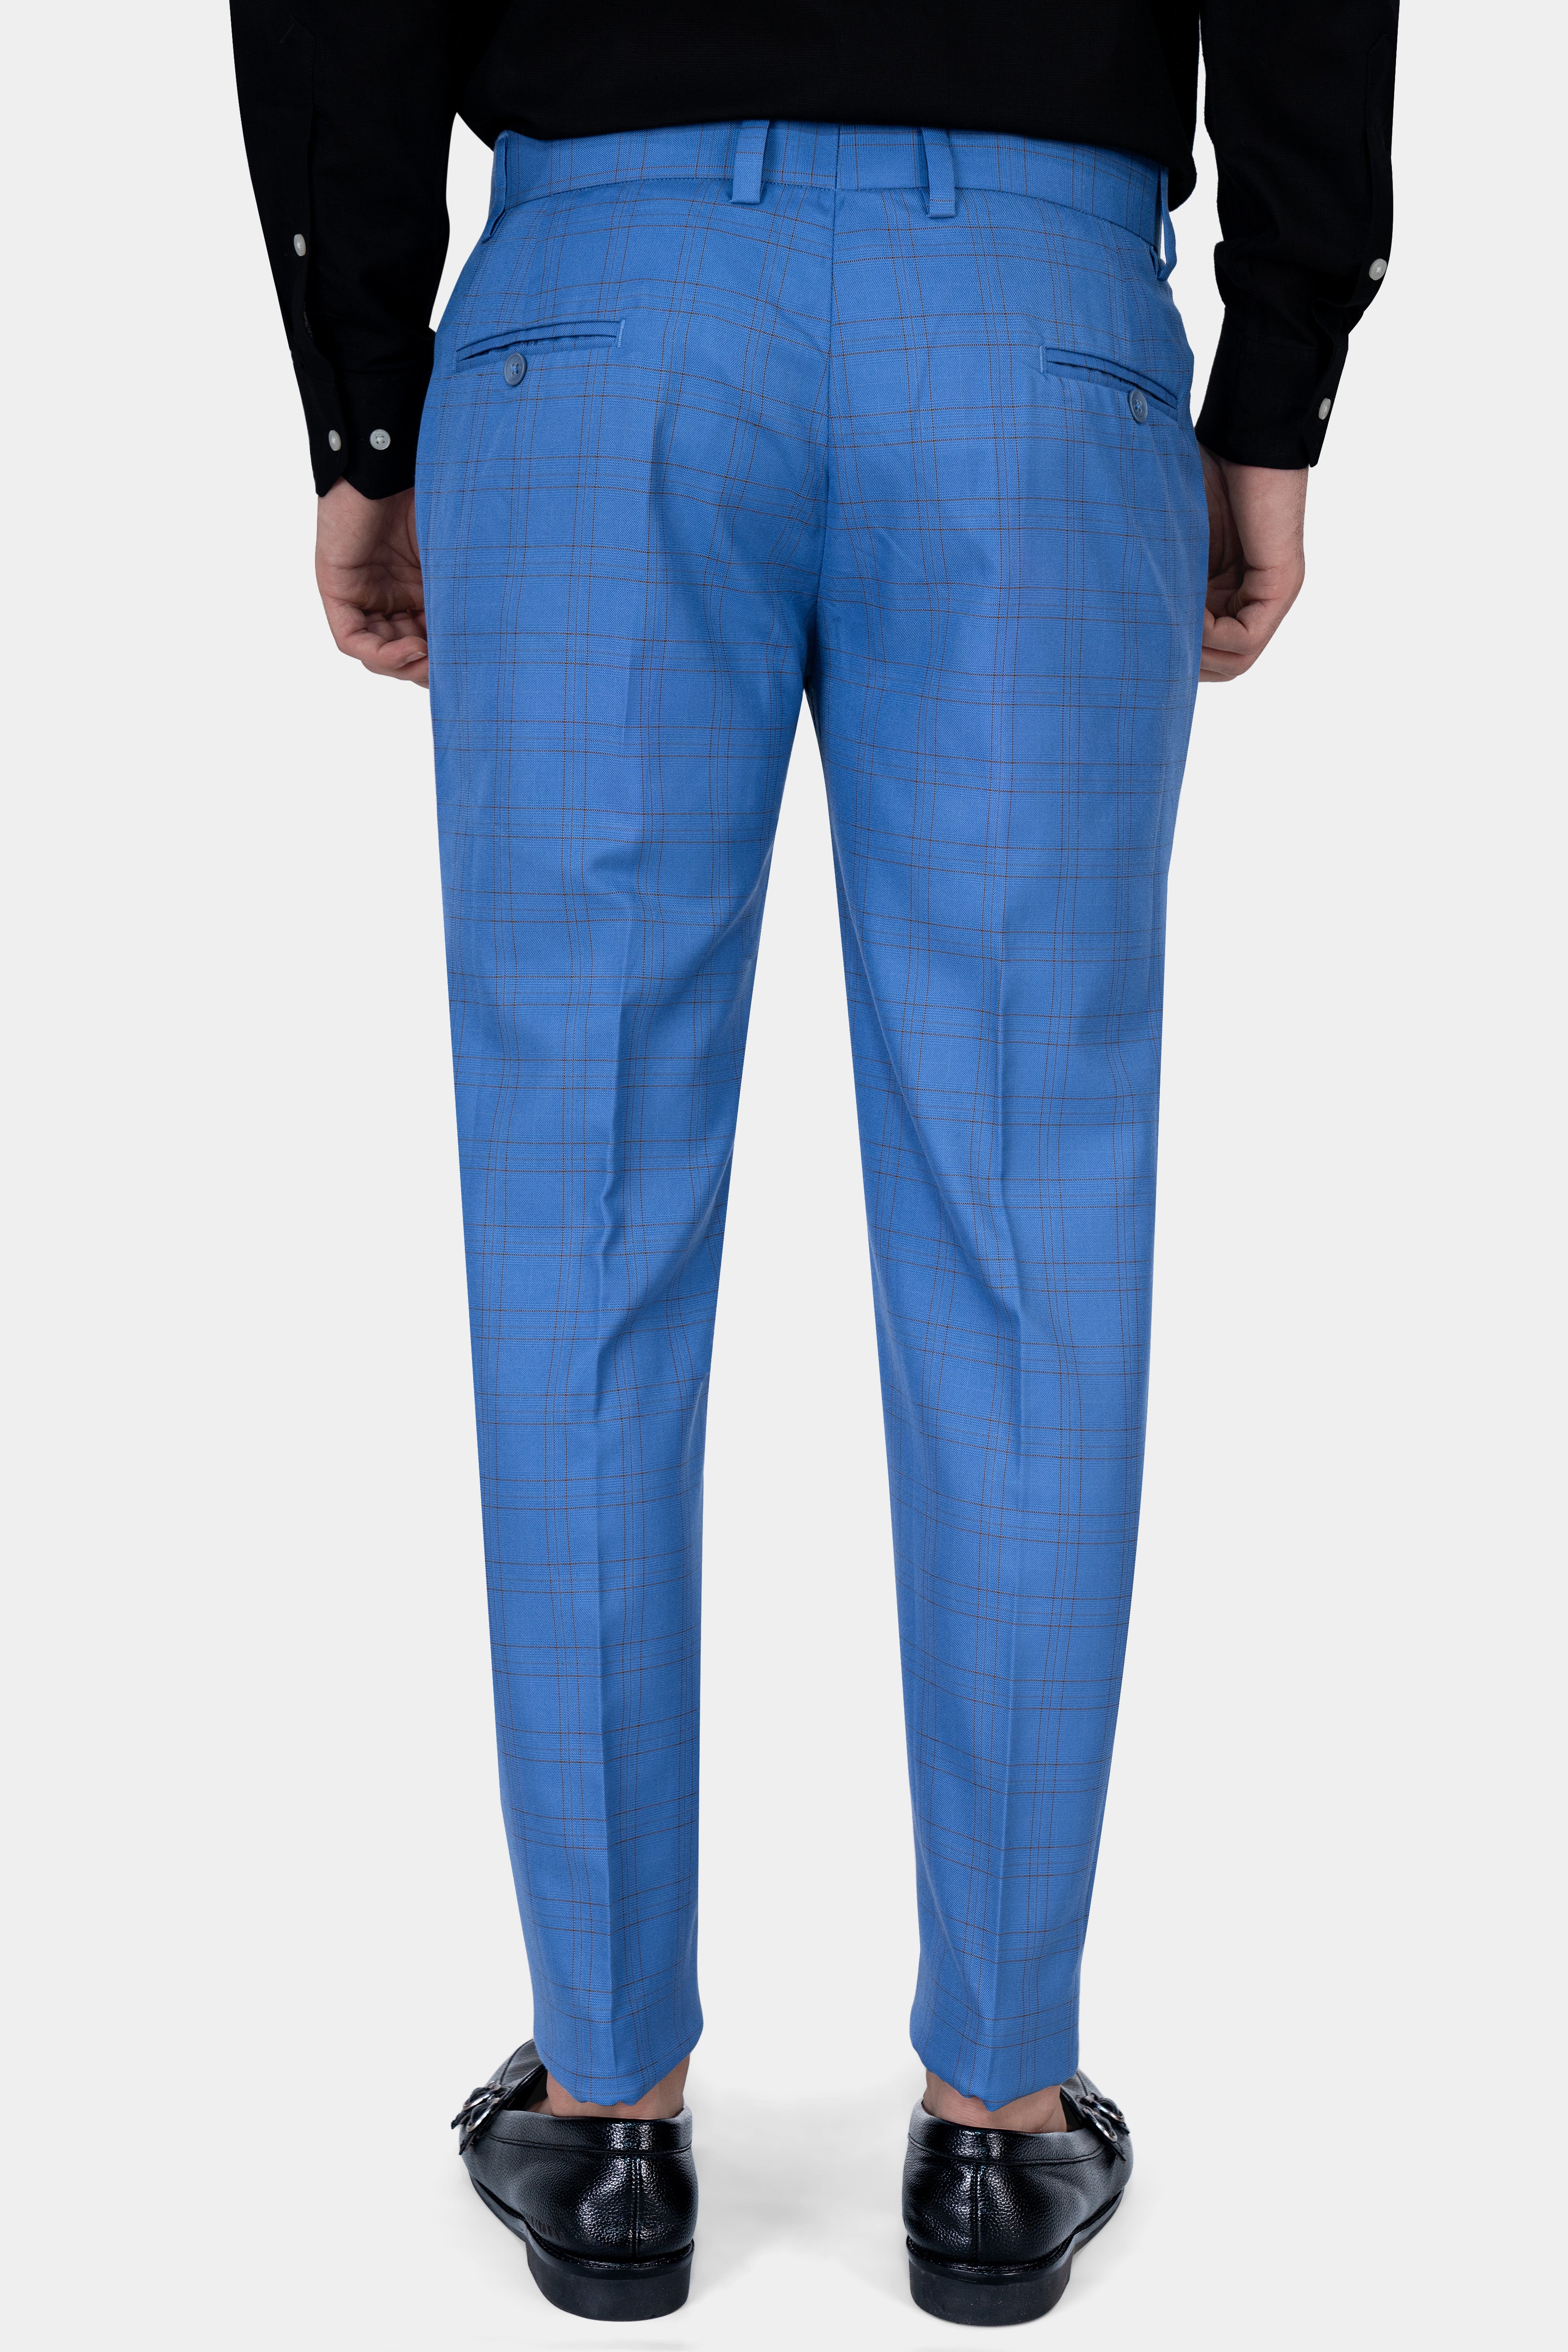 Tufts Blue and Taupe Brown Plaid Wool Rich Bandhgala Designer Suit ST2876-D434-36,ST2876-D434-38,ST2876-D434-40,ST2876-D434-42,ST2876-D434-44,ST2876-D434-46,ST2876-D434-48,ST2876-D434-50,ST2876-D434-52,ST2876-D434-54,ST2876-D434-56,ST2876-D434-58,ST2876-D434-60